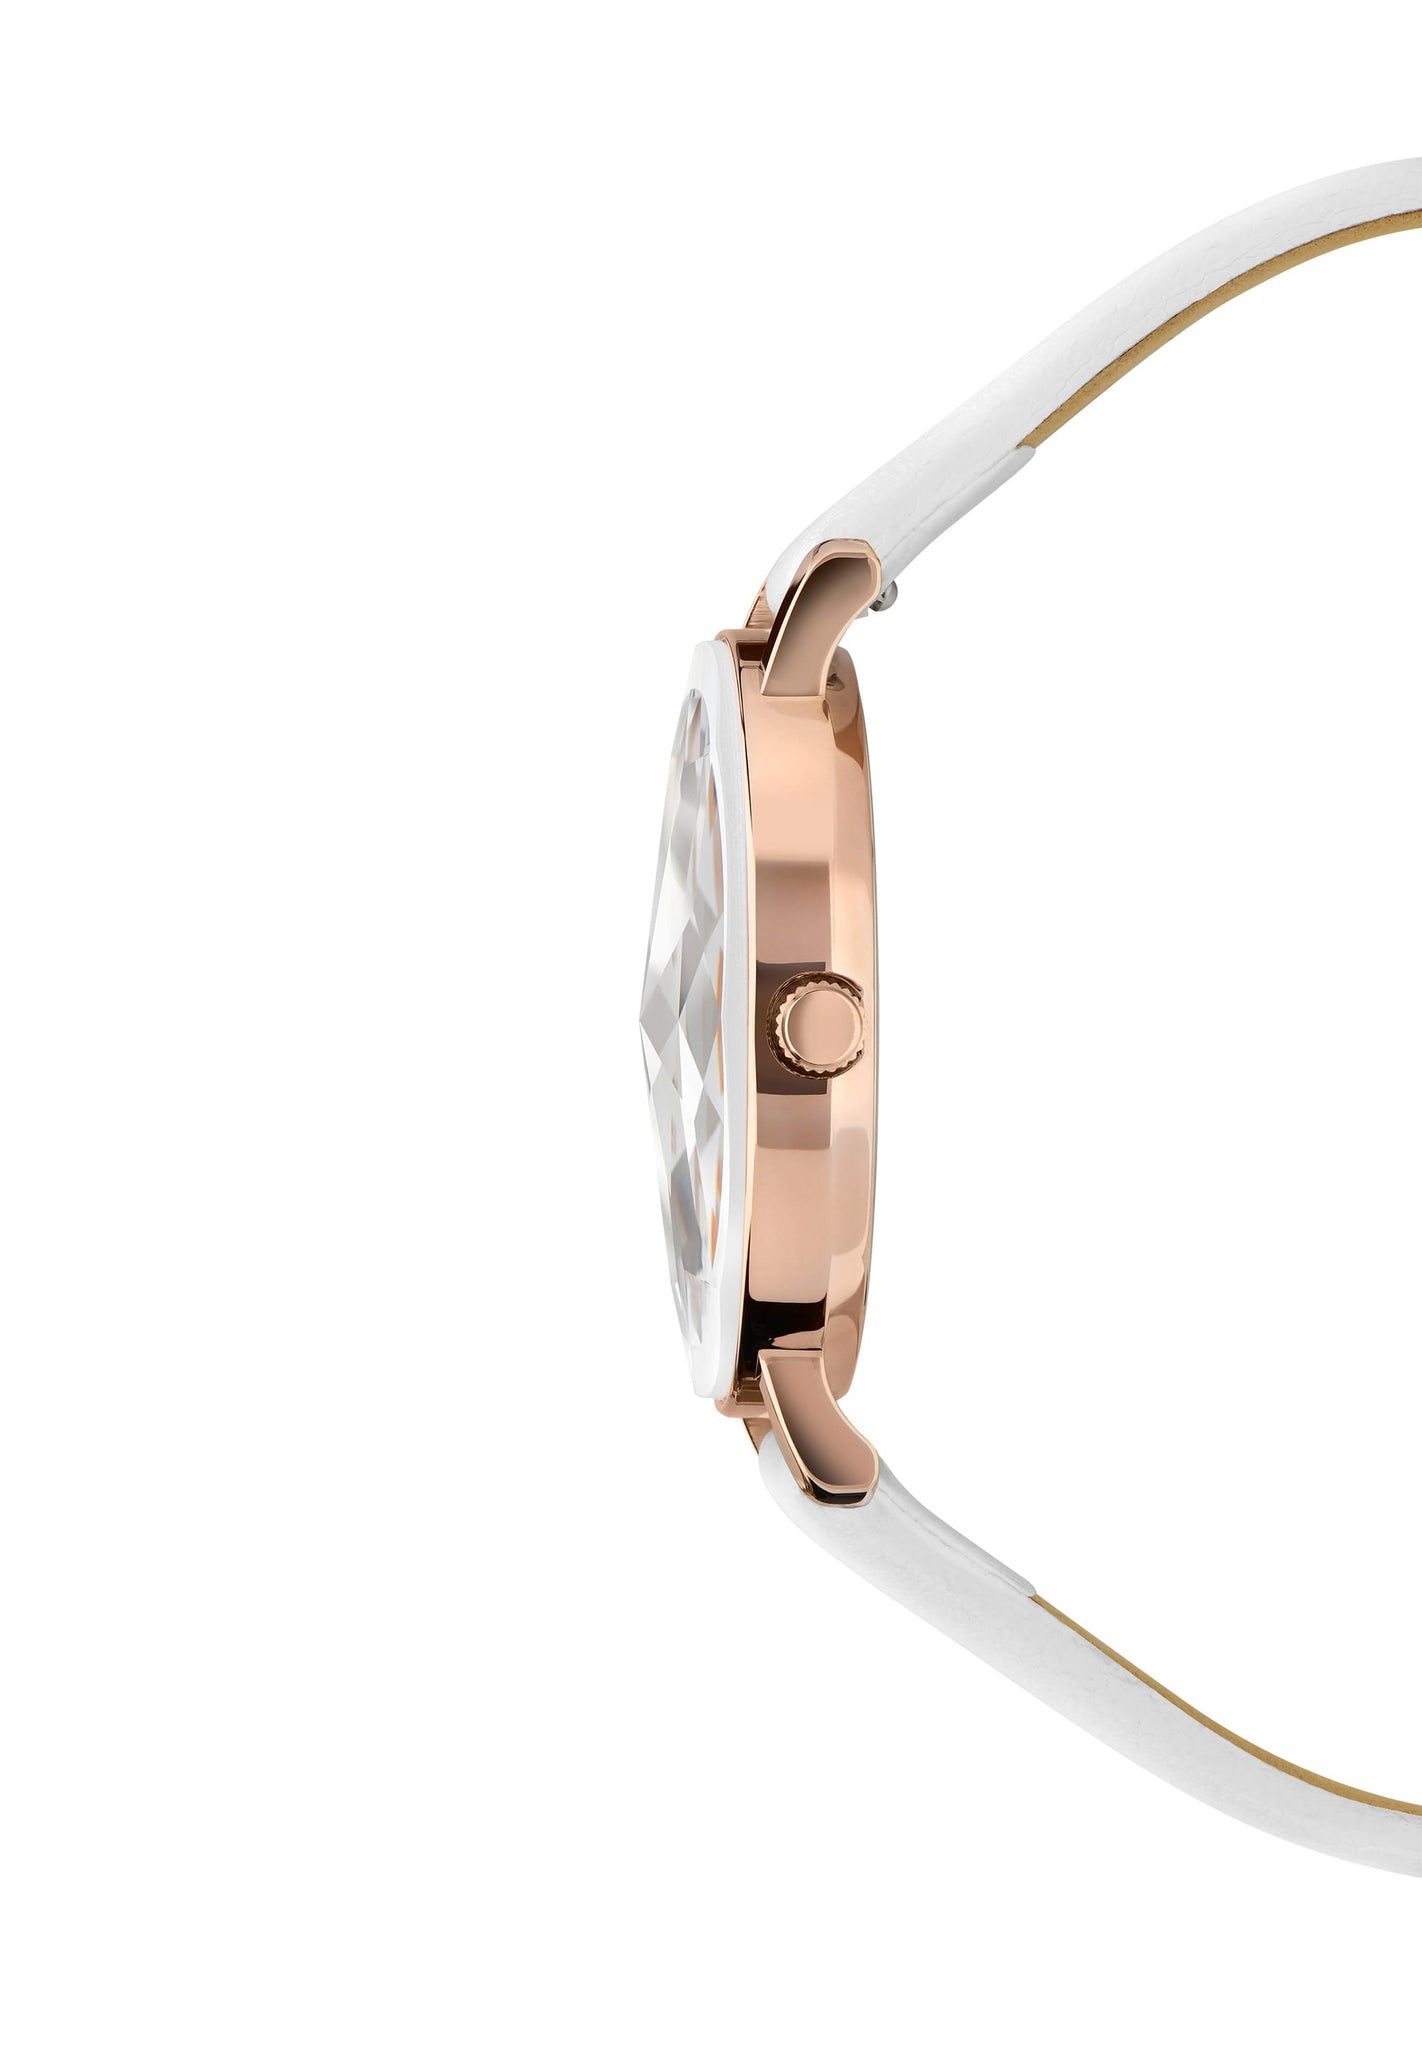 DISCOVER THE LUXURY OF ROSE GOLD WATCHES FOR WOMEN – Jowissa